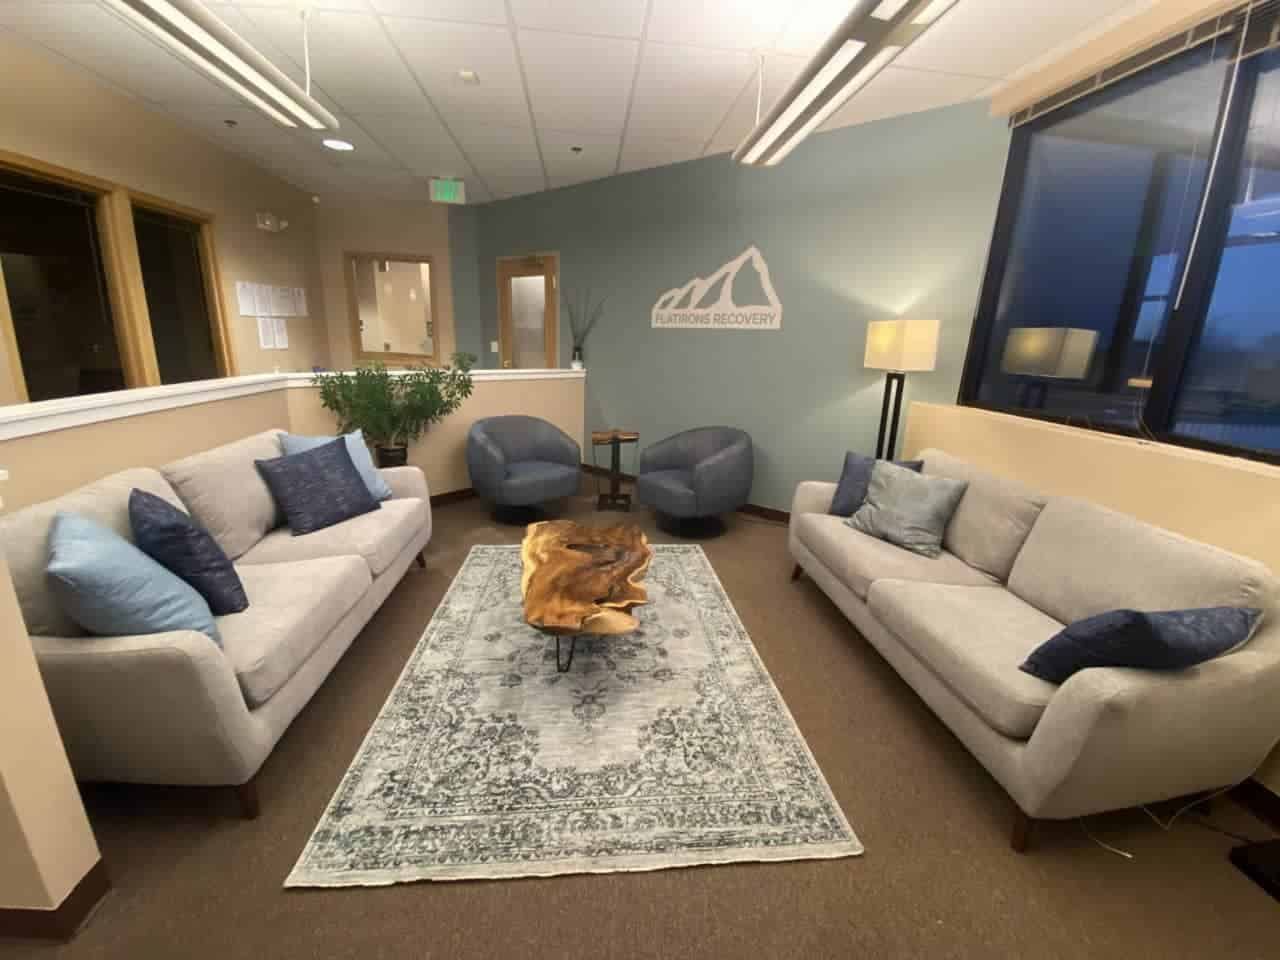 waiting room with couches, chairs, and coffee table